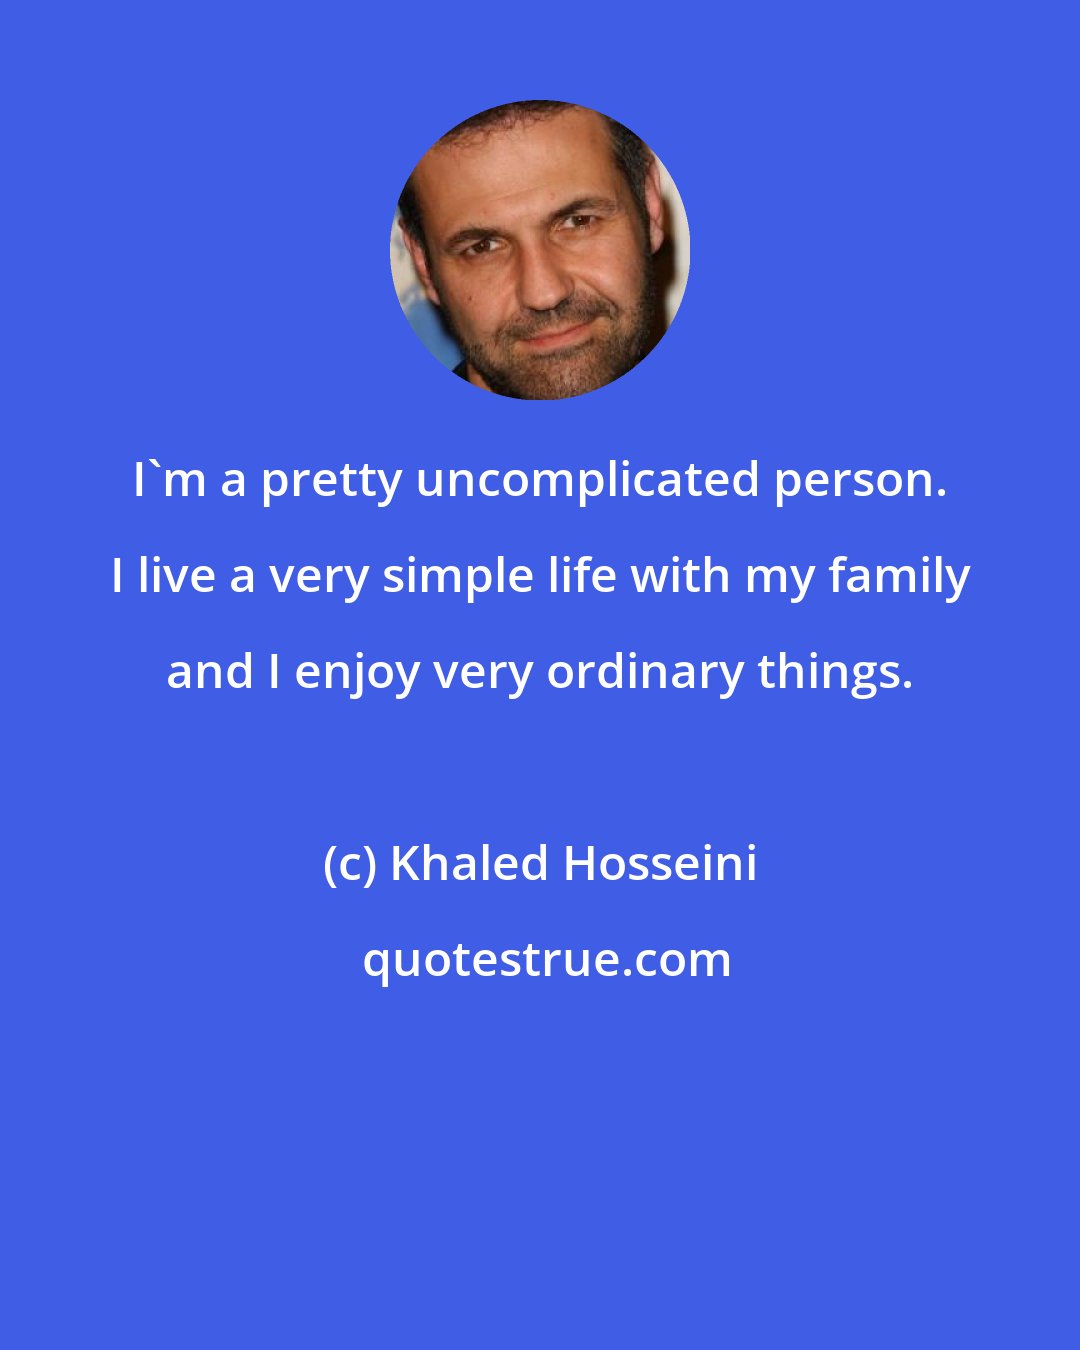 Khaled Hosseini: I'm a pretty uncomplicated person. I live a very simple life with my family and I enjoy very ordinary things.